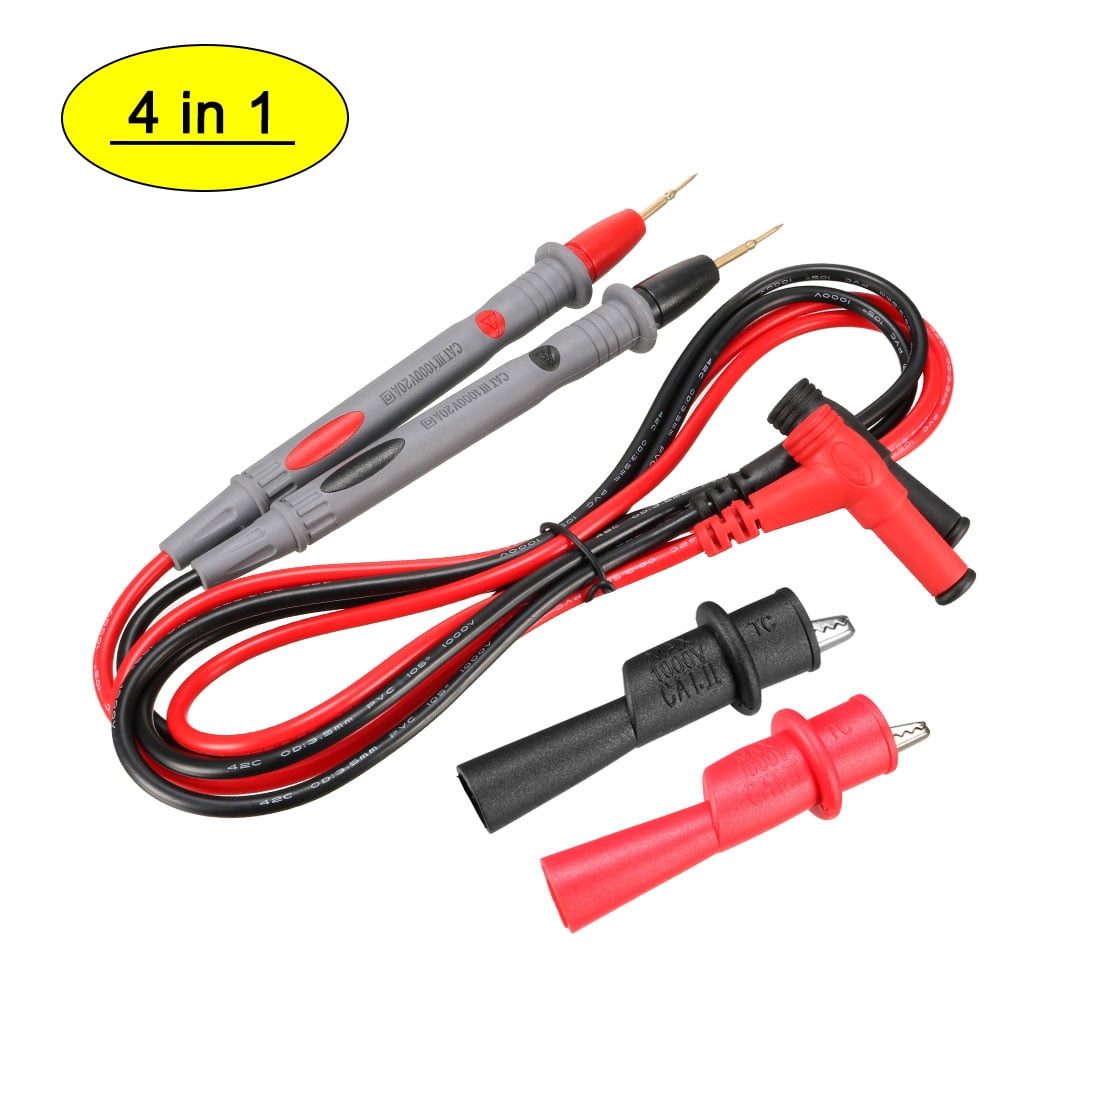 Banana Plug To Test Hook Clip Probe Cable For Multimeter Test Equipment WQ 